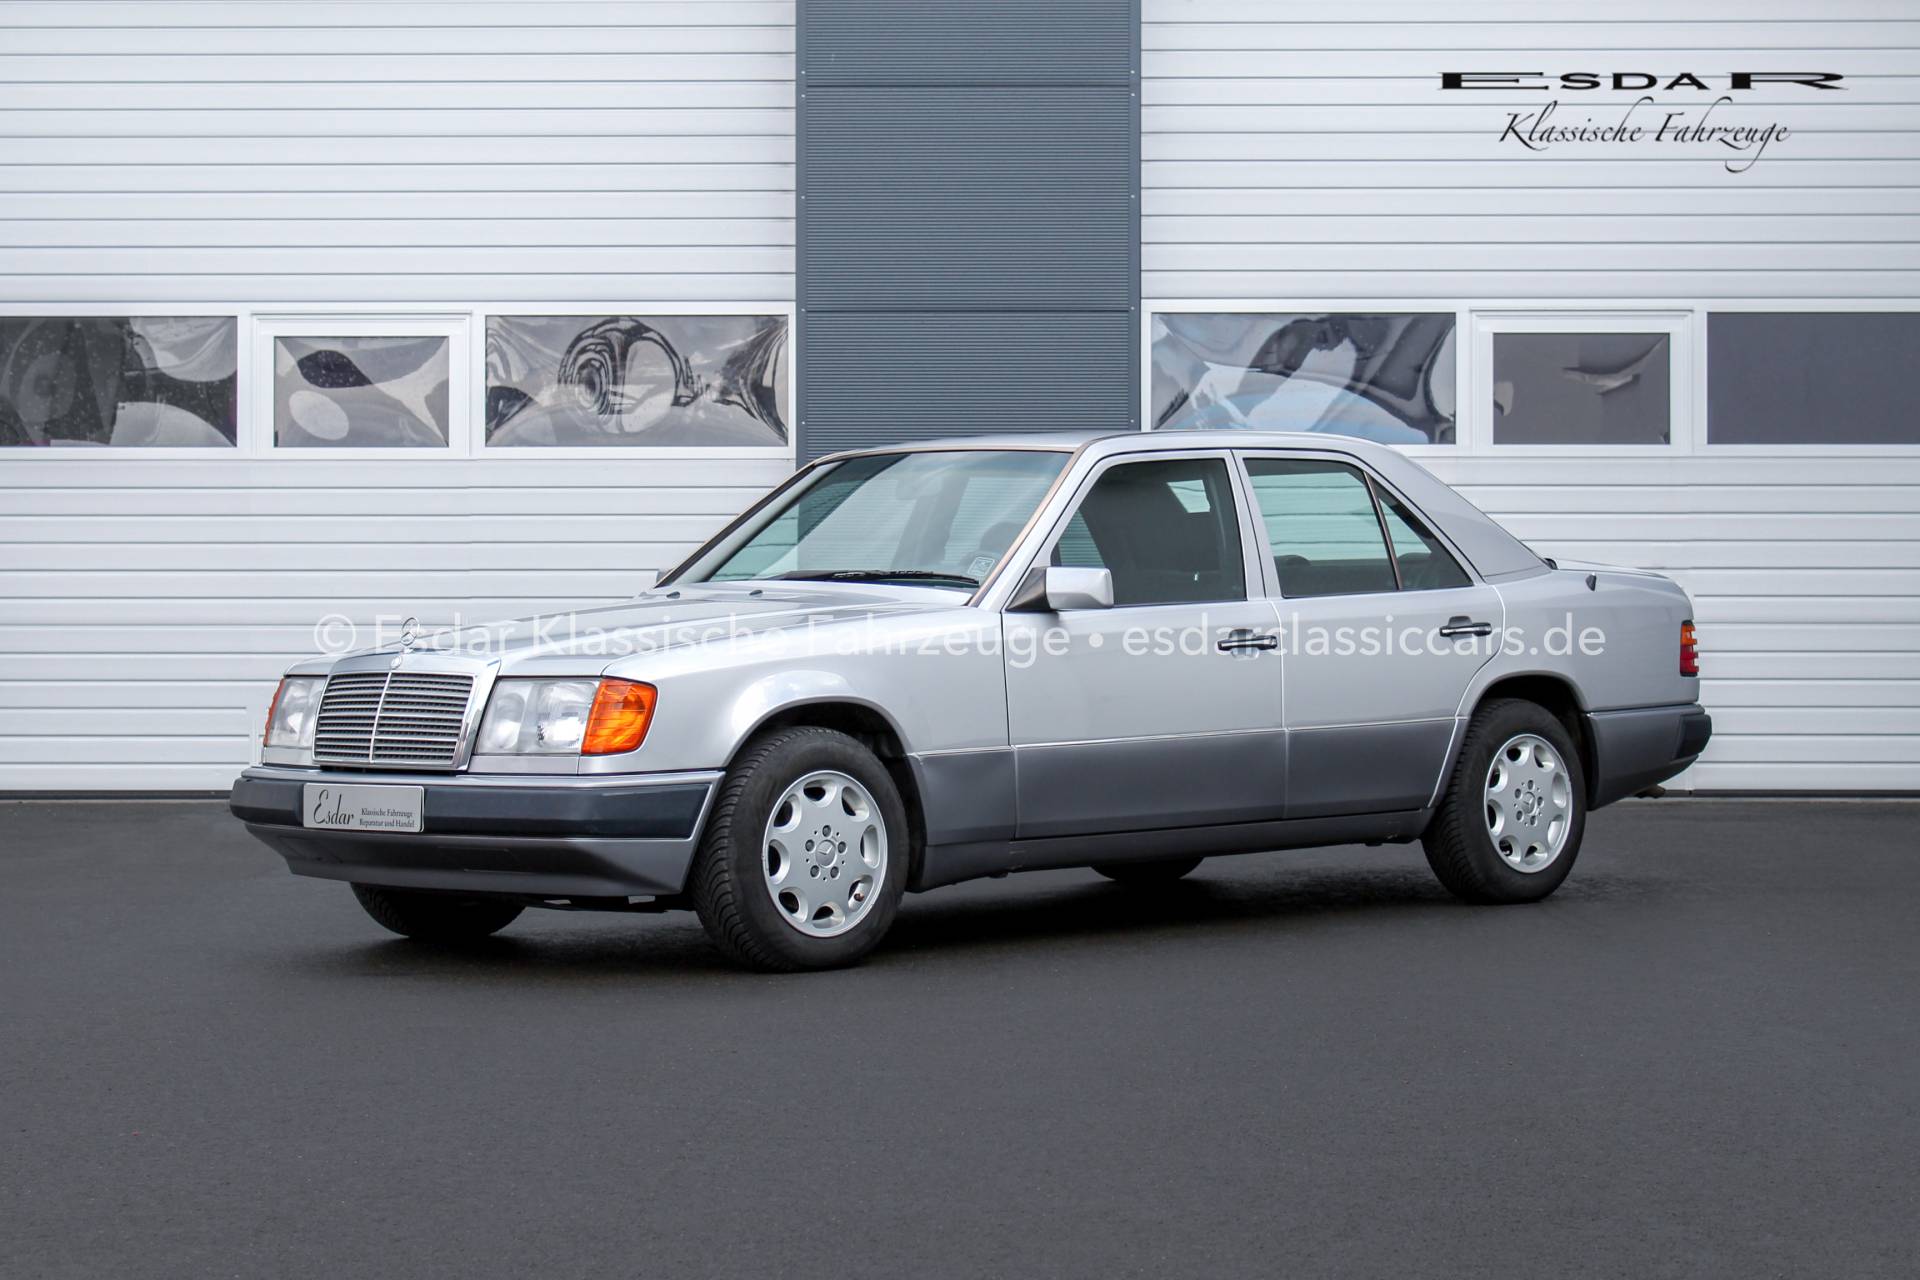 Mercedes-Benz E-Class Classic Cars for Sale - Classic Trader